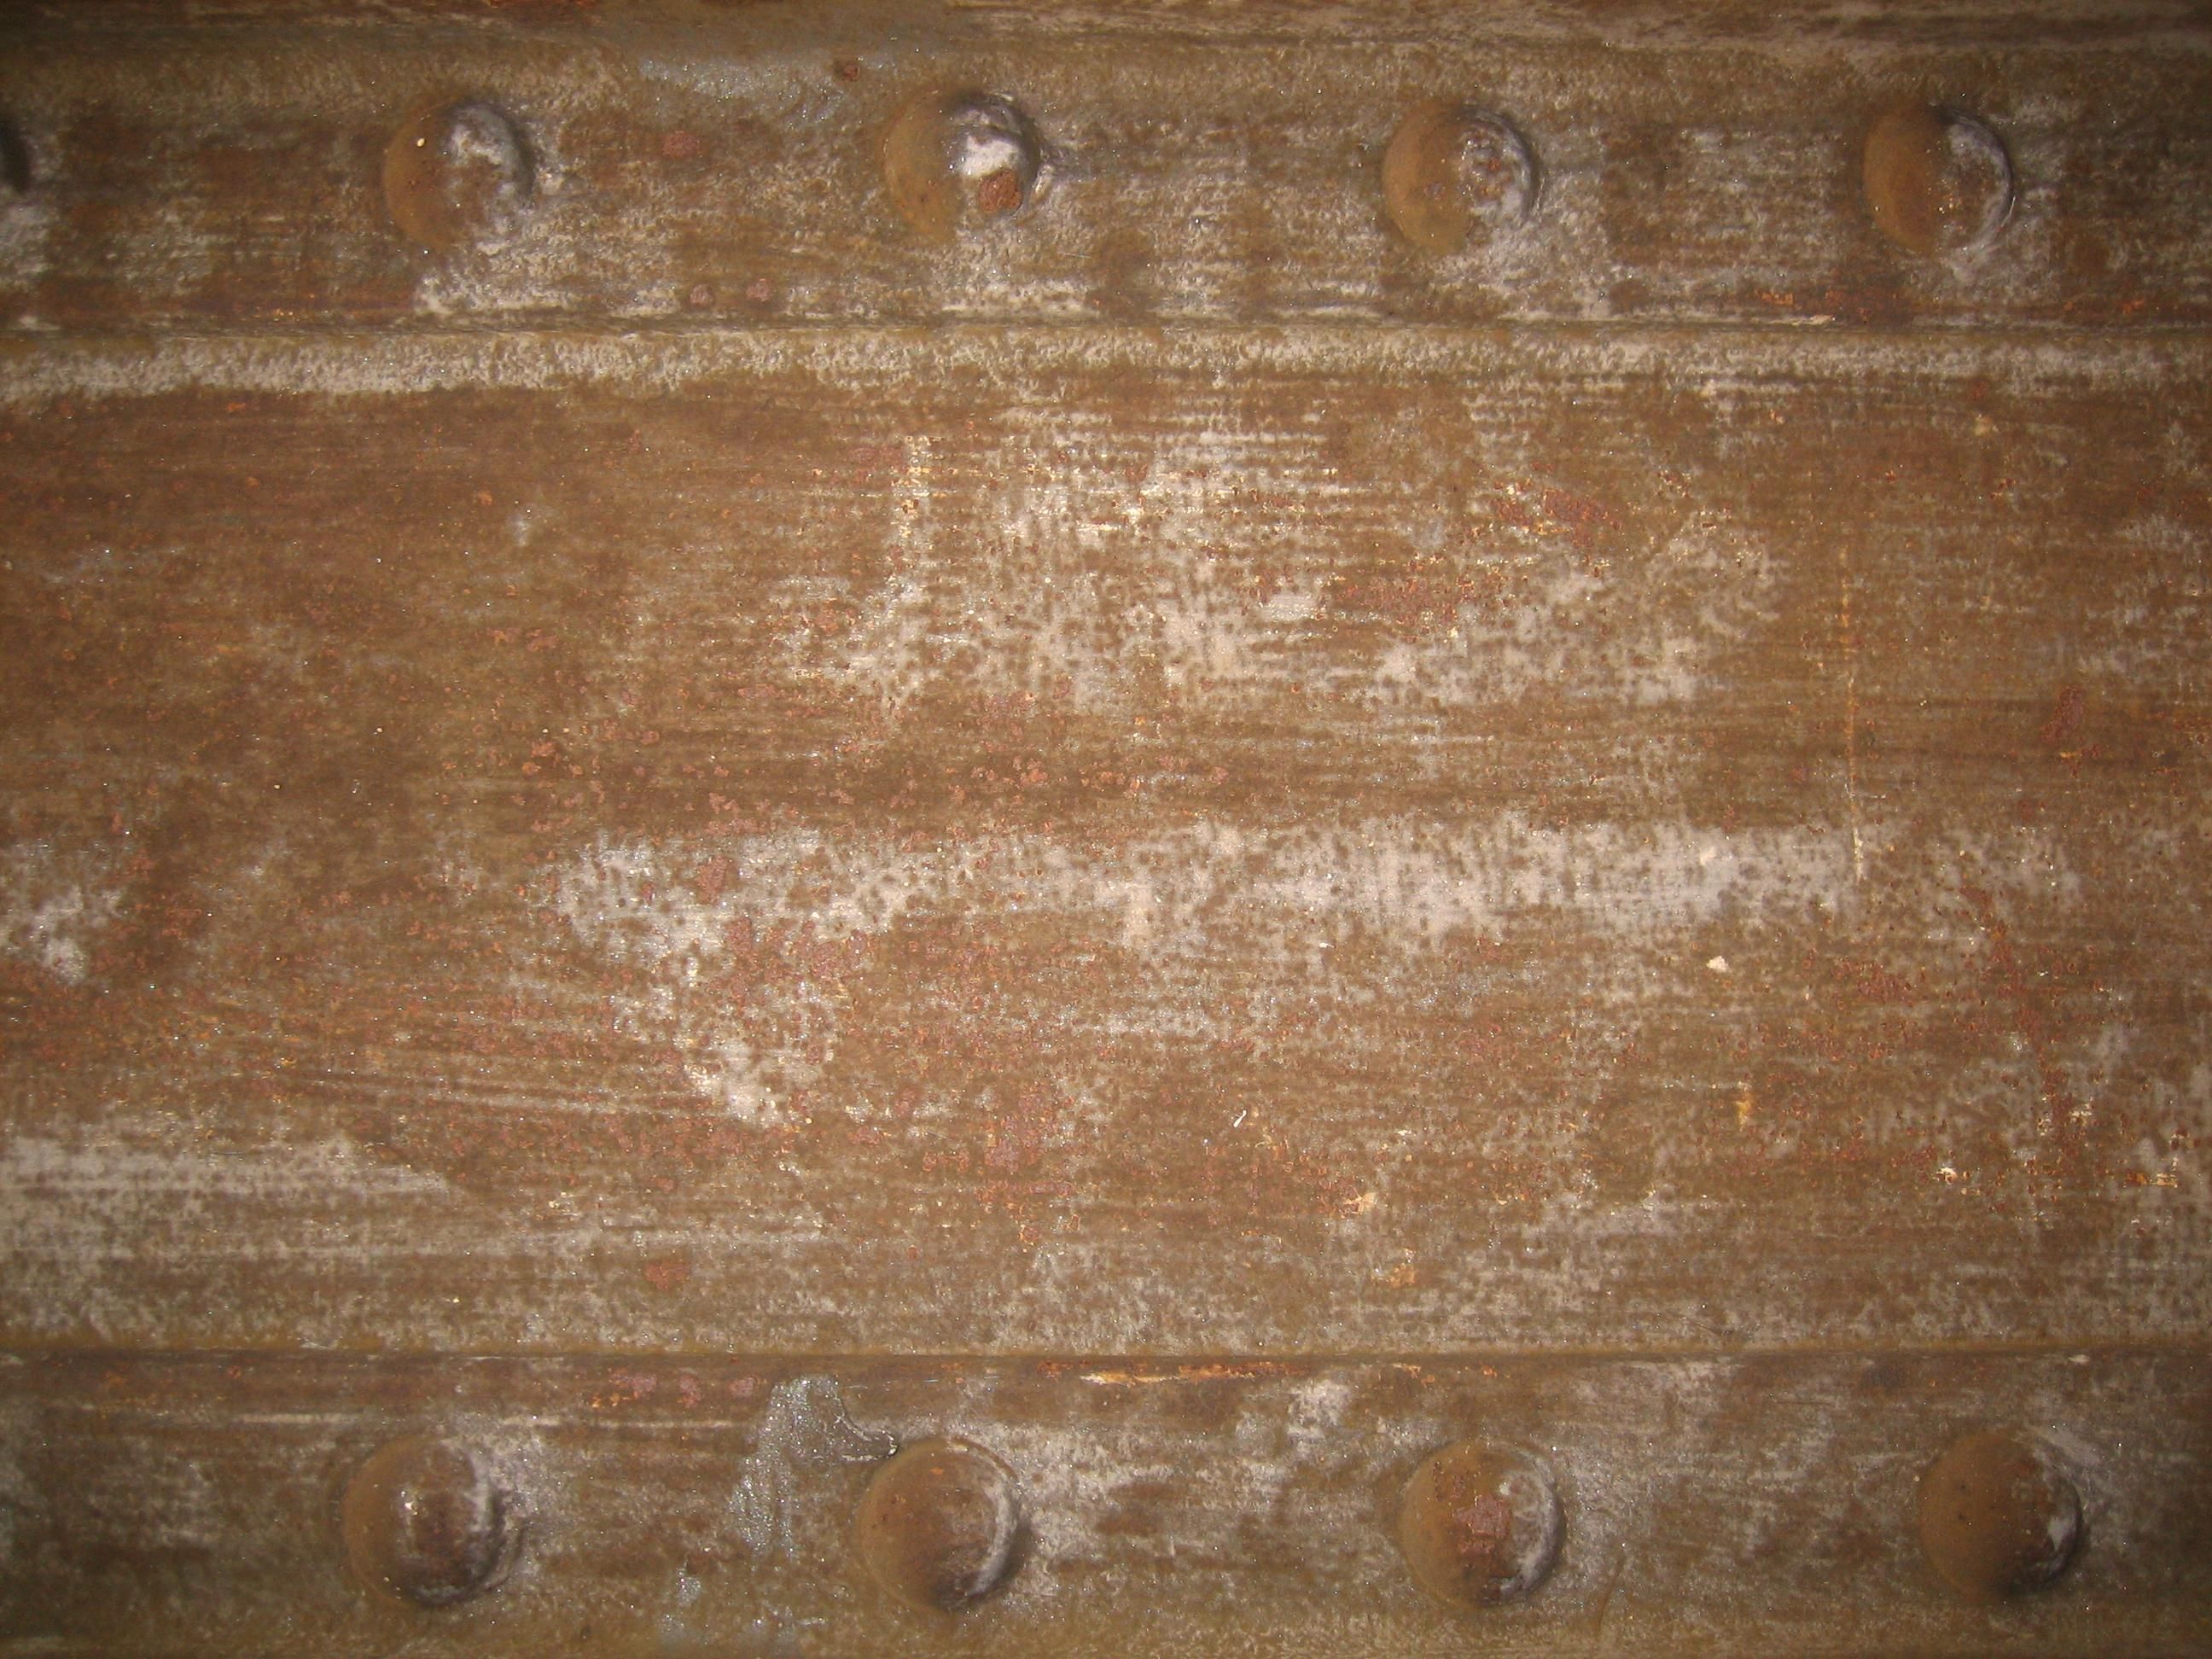 File:Cream beige moderately scratched rusty scuffed worn seamless metal  surface texture.jpg - Wikimedia Commons